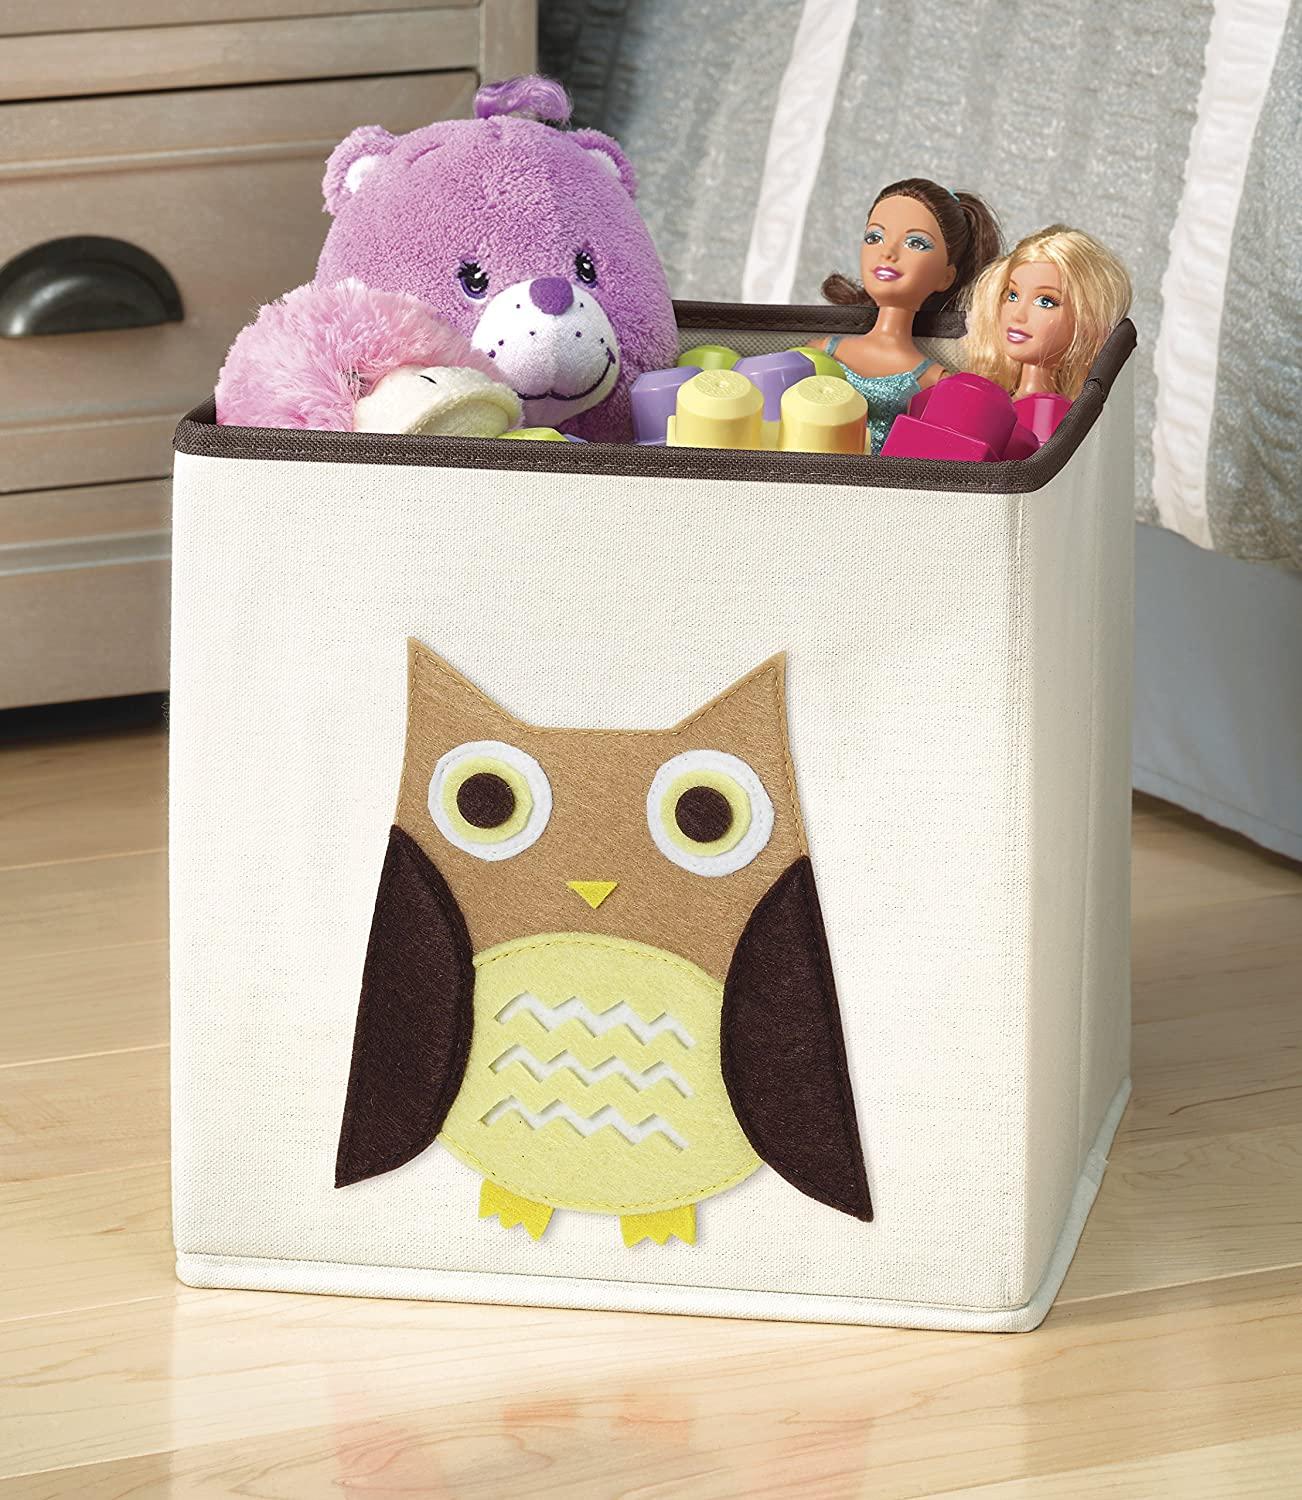 Whitmor Kids Canvas Collapsible Cube-Brown Owl